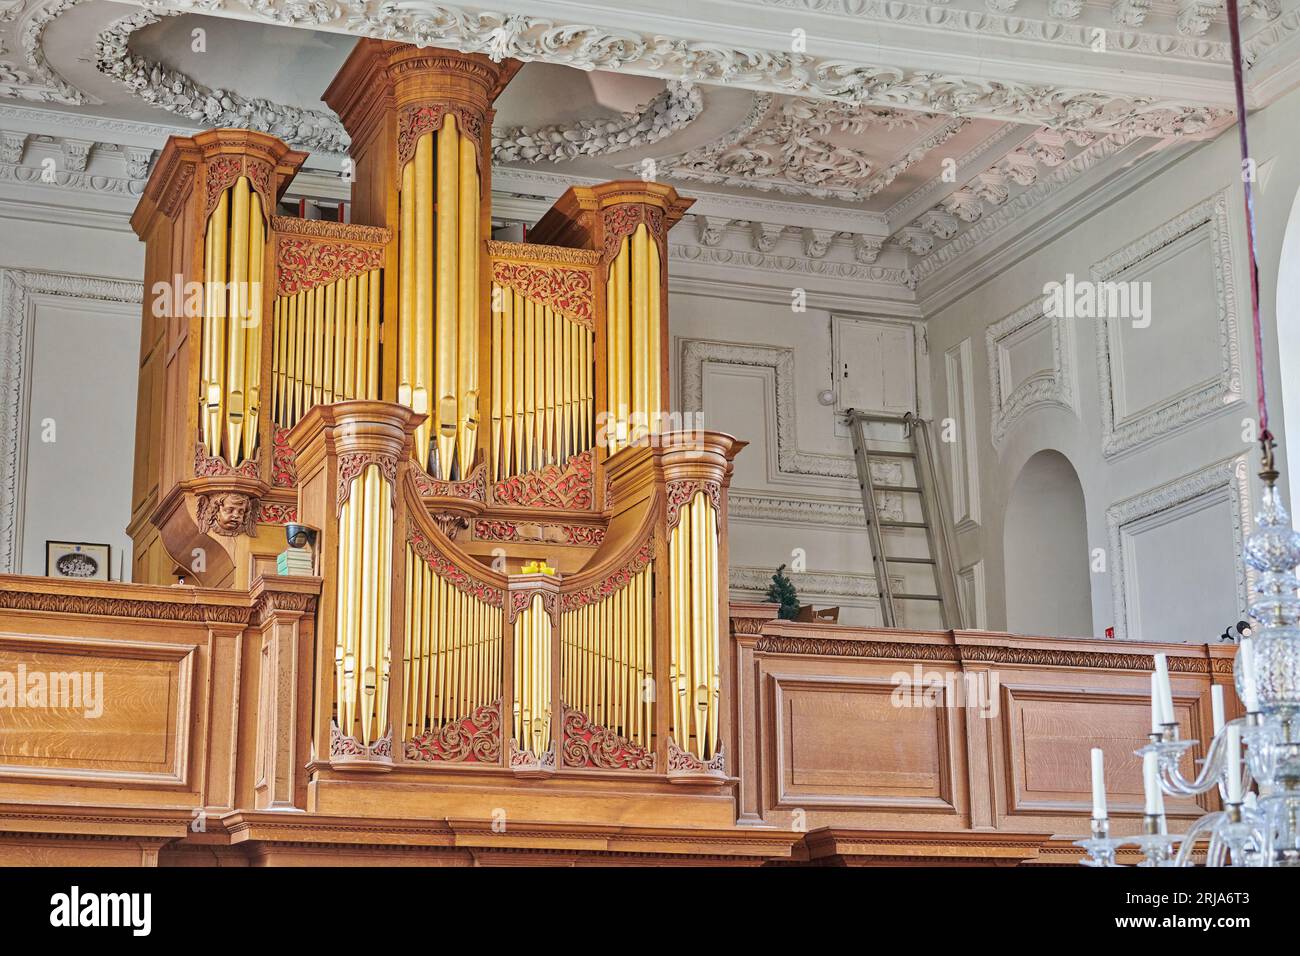 Organ pipes in the chapel at Emmanuel College, University of Cambridge, England. Stock Photo